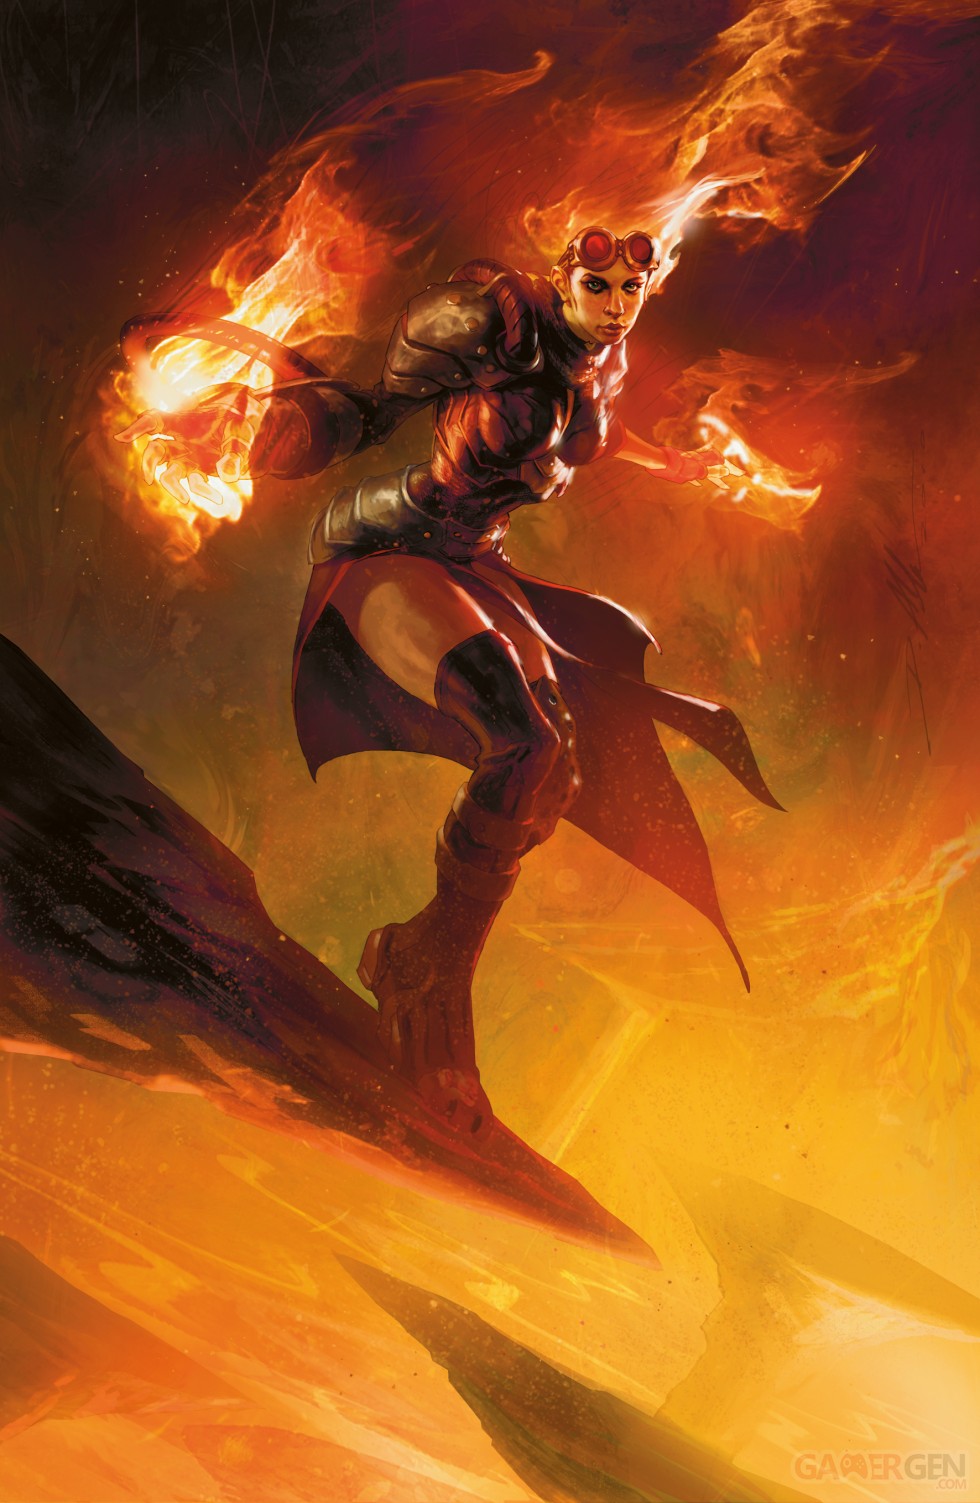 Magic-The-Gathering-Duels-of-the-Planeswalkers-2012-artwork-01062011-03